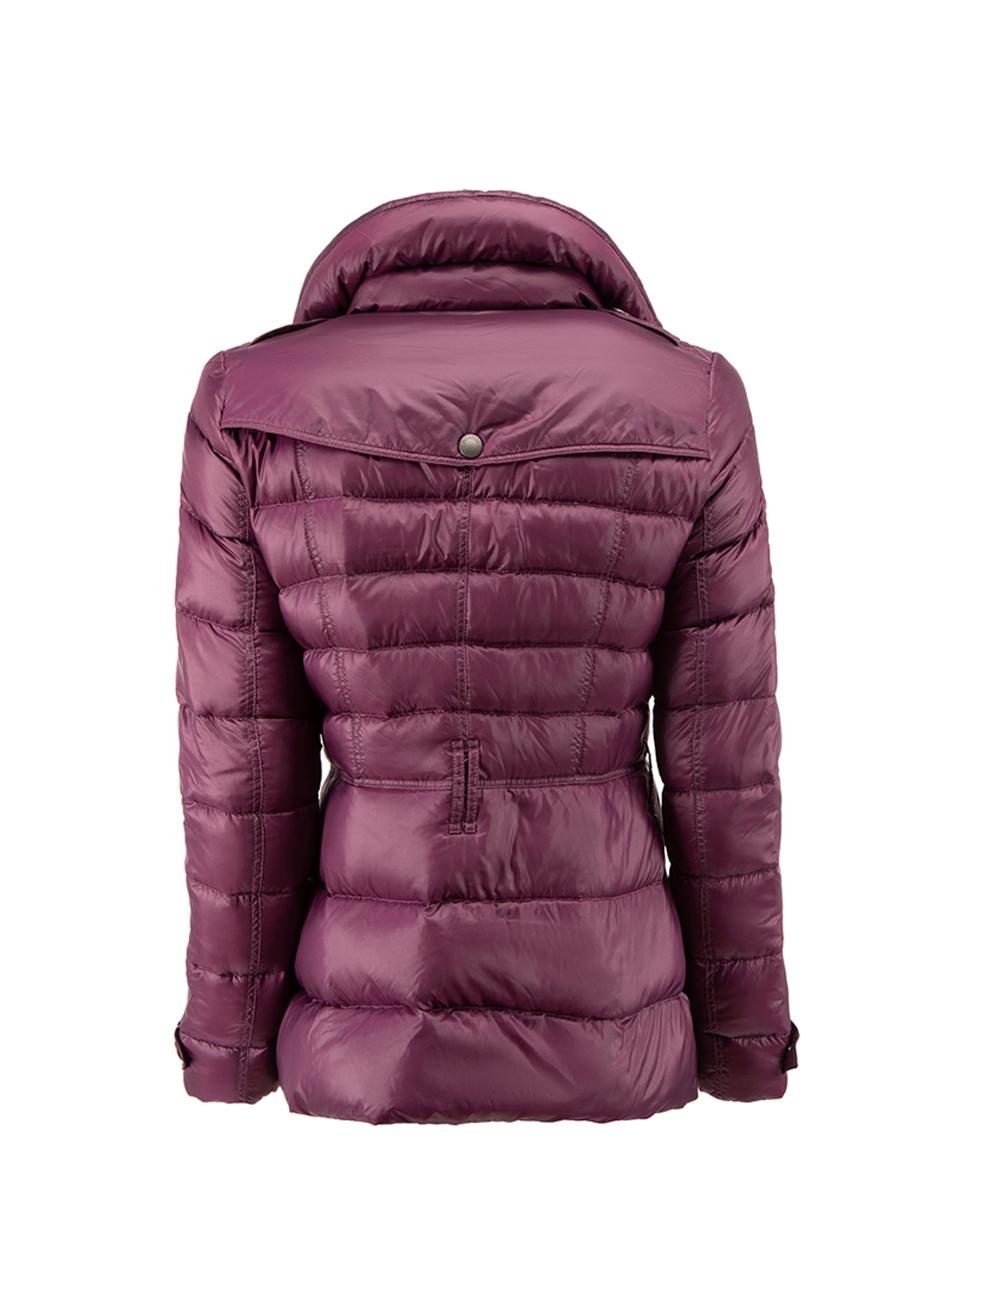 Burberry Burberry Brit Purple Feather Down Puffer Coat Size S In Excellent Condition In London, GB